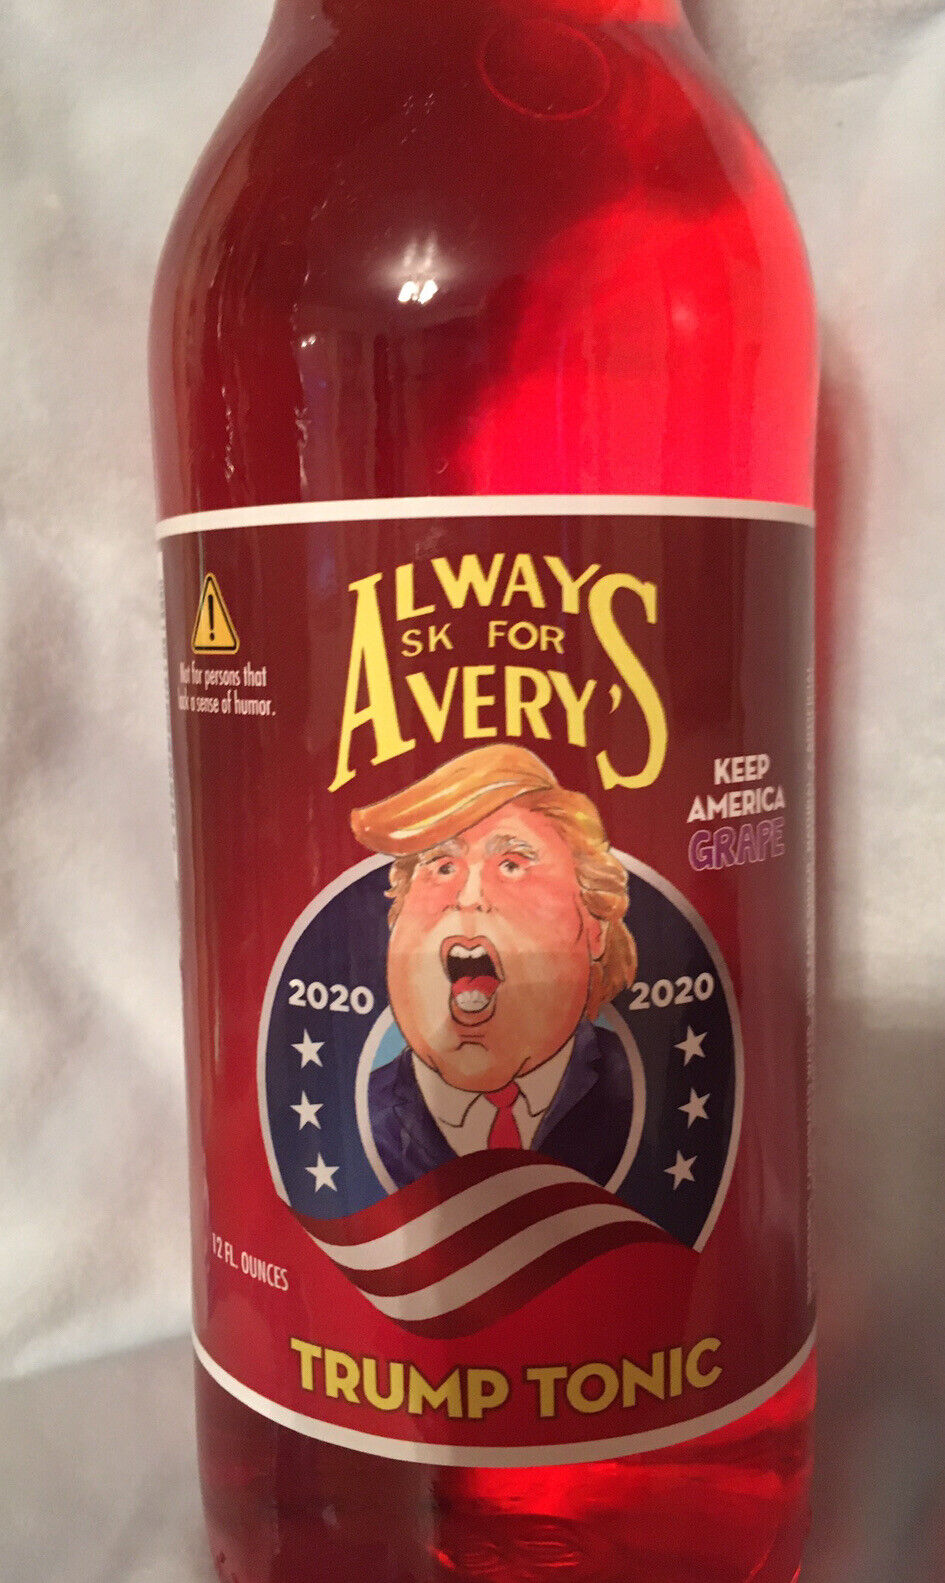 OFFICIAL Trump and Biden Avery’s Soda Limited Edition